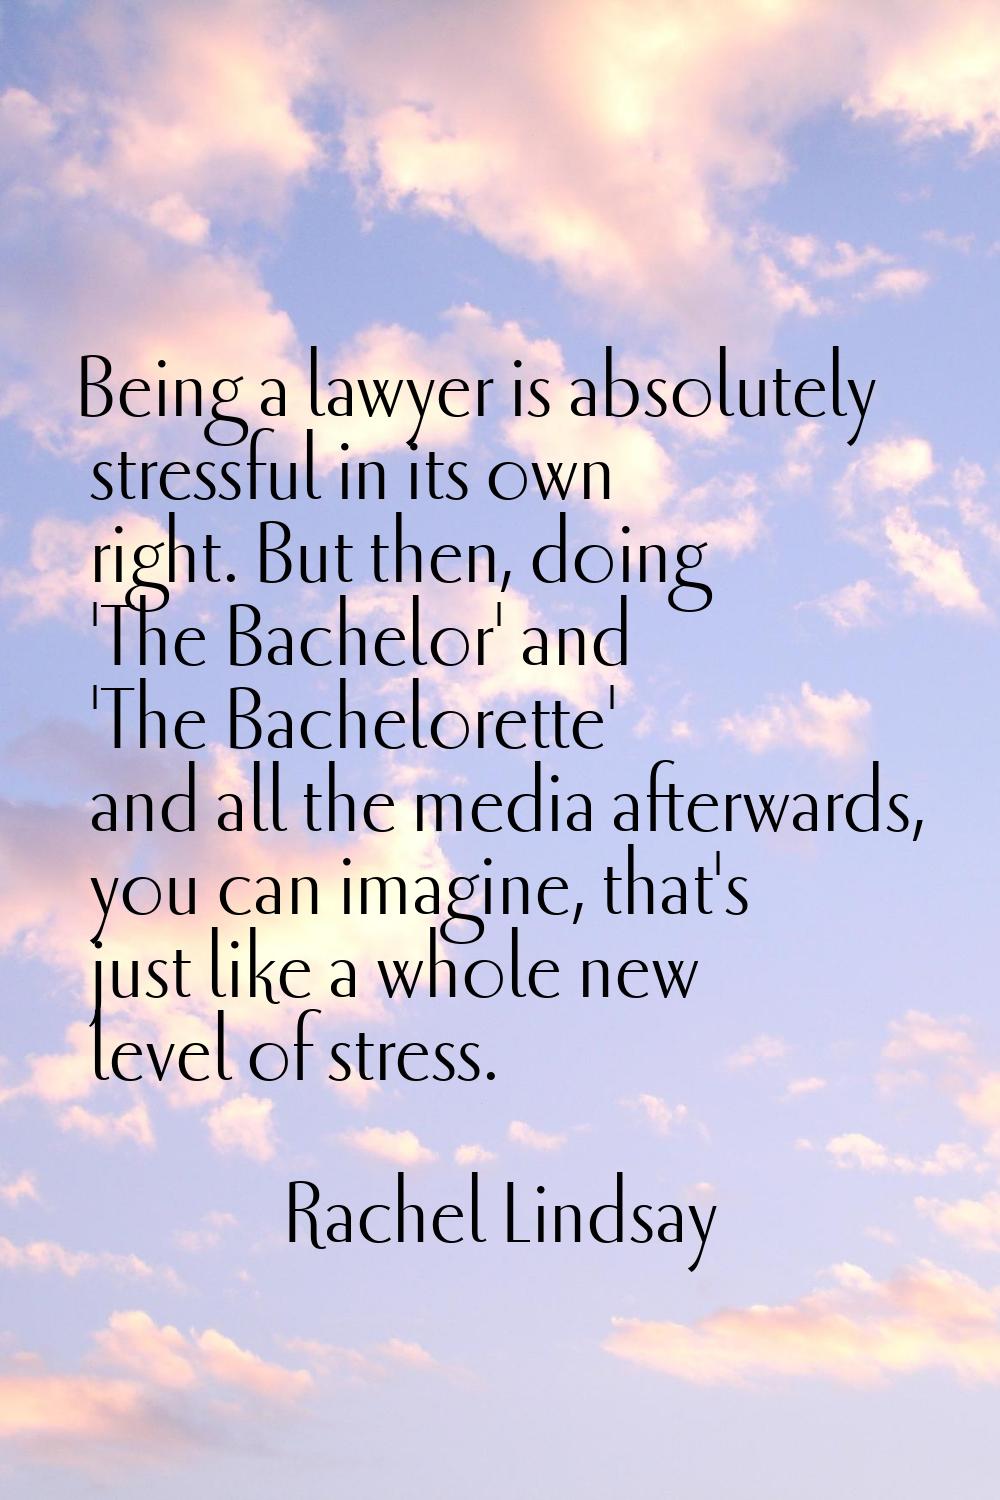 Being a lawyer is absolutely stressful in its own right. But then, doing 'The Bachelor' and 'The Ba